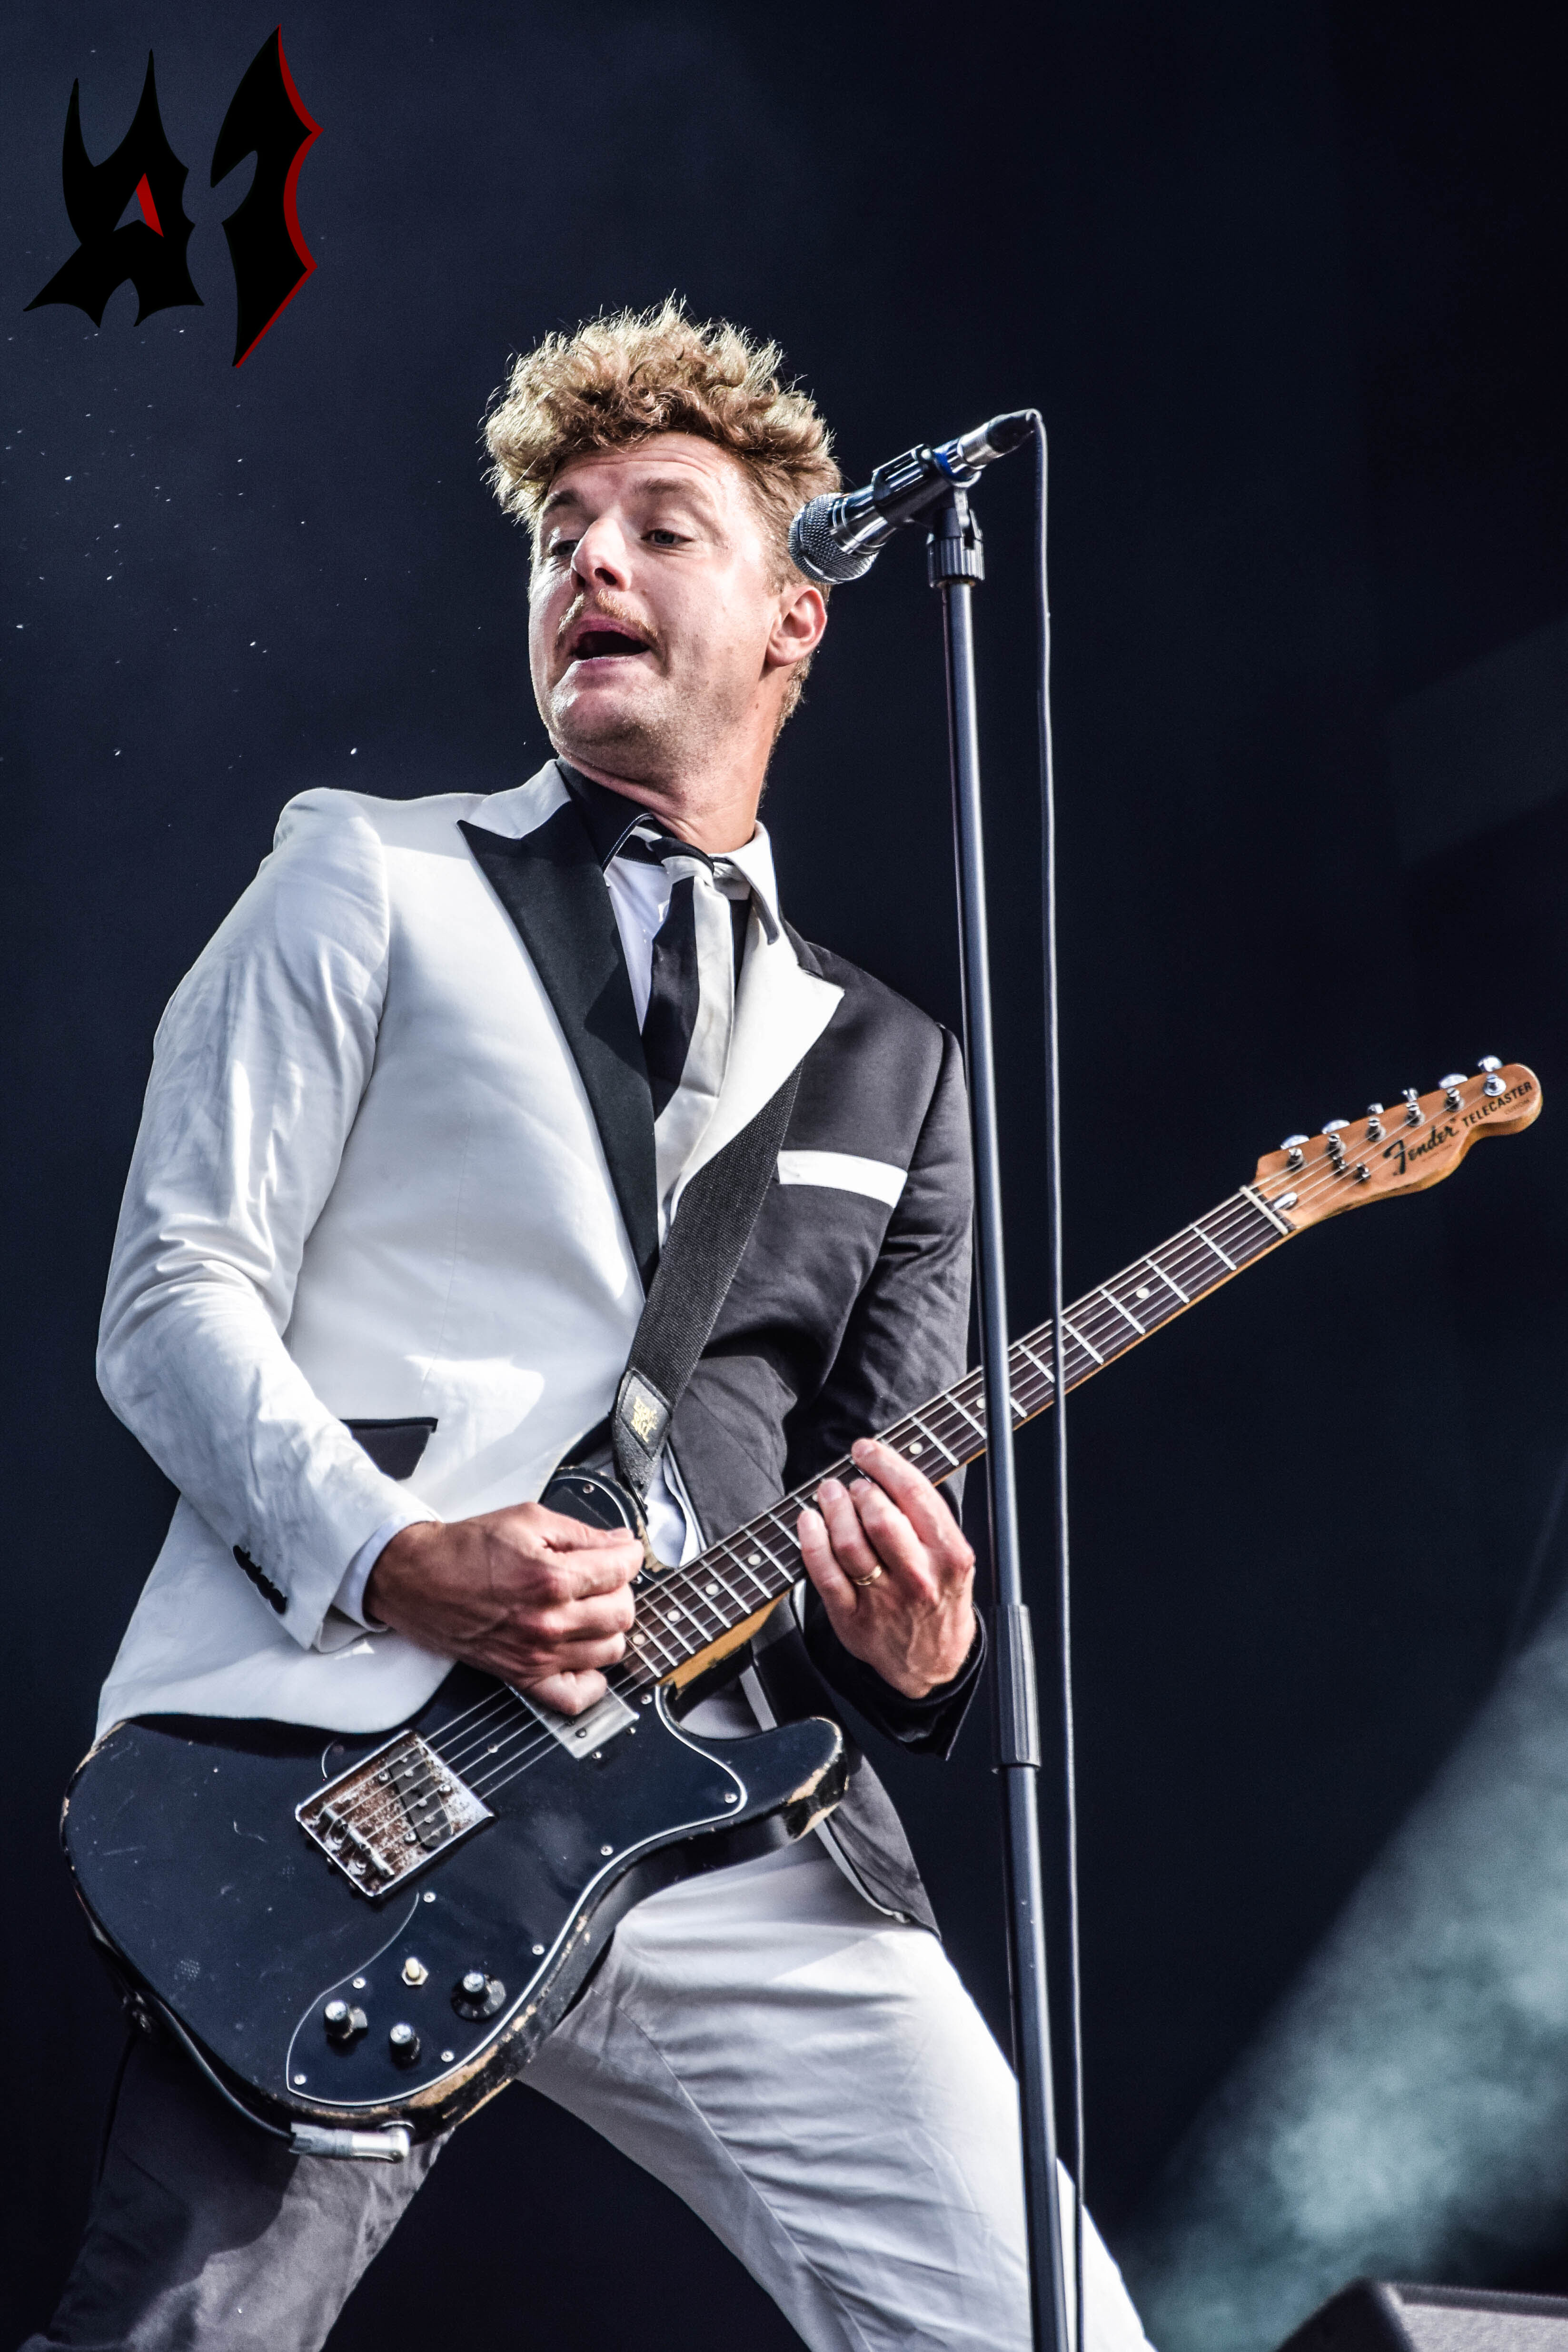 Donwload 2018 – Day 3 - The Hives 19